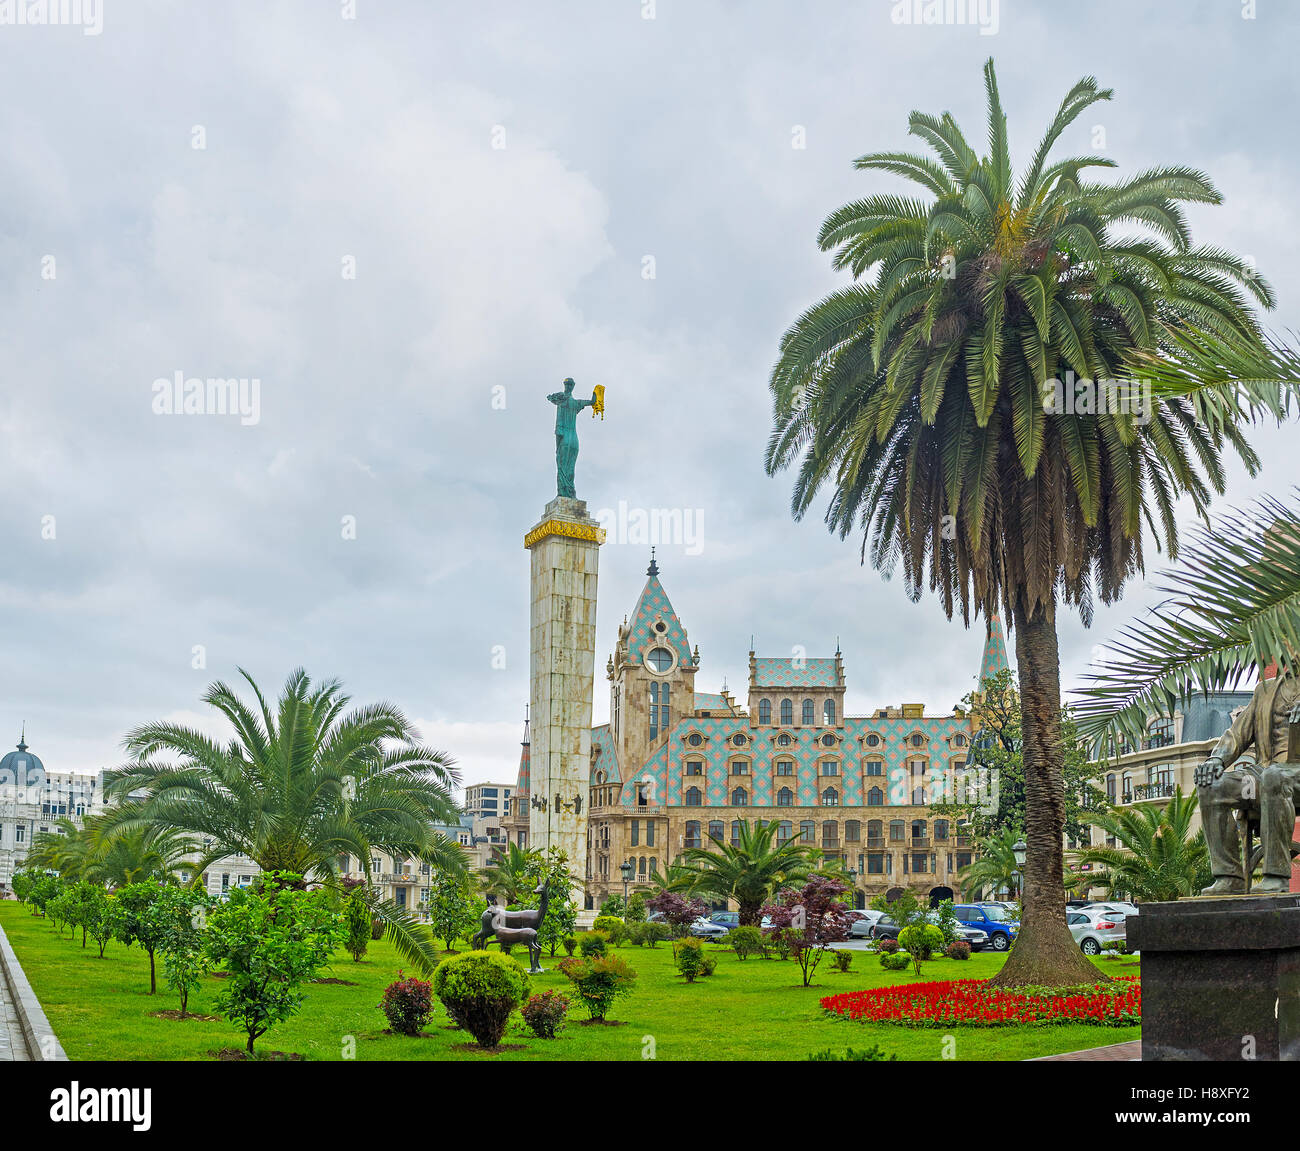 The statue of Medea with the golden fleece among the palm trees in the Europe Square of Batumi, Georgia. Stock Photo